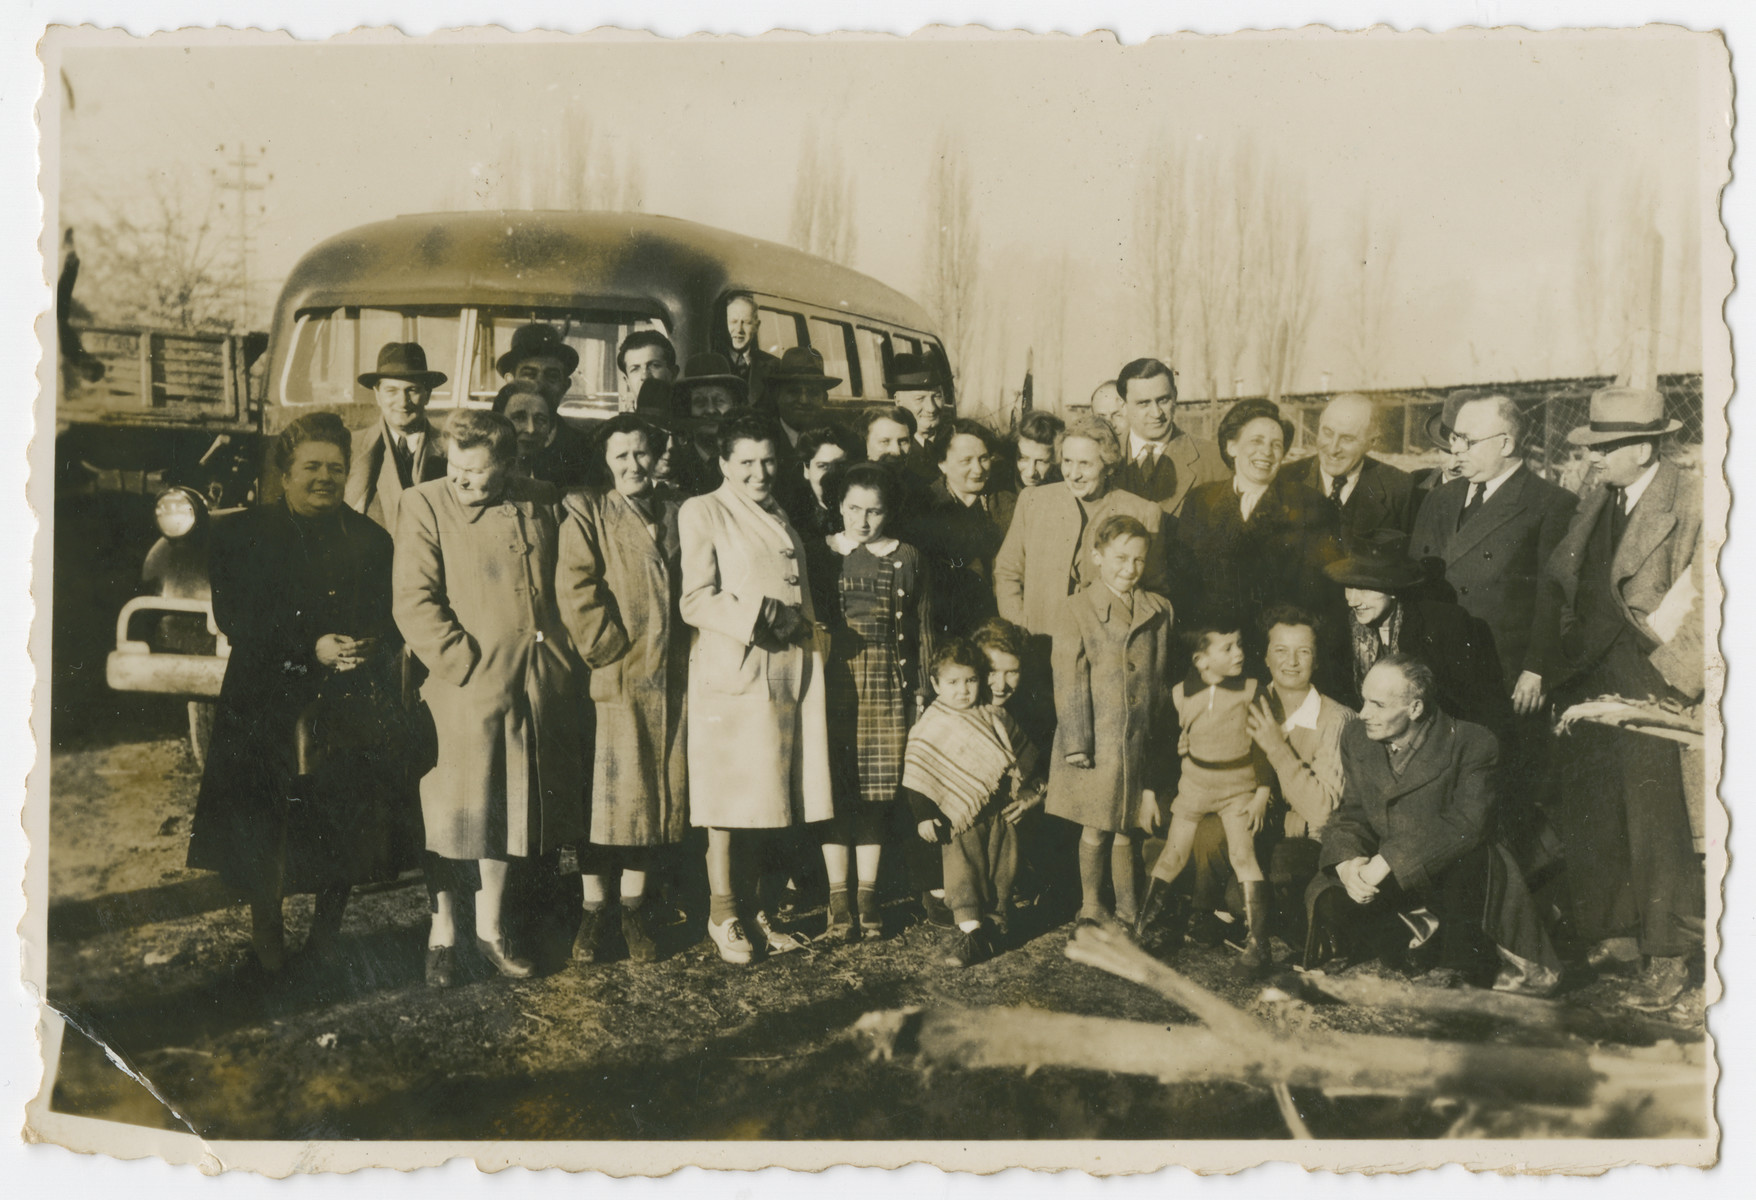 Photograph from an album entitled, "Hacshara Kidma Chile,"  documenting life on a postwar Zionist agricultural collective in Chile.

Group photo of the parents of the first group of Hachshara members.  The inscription on the album page (in Spanish) reads, "The first Jalutzim and their parents."